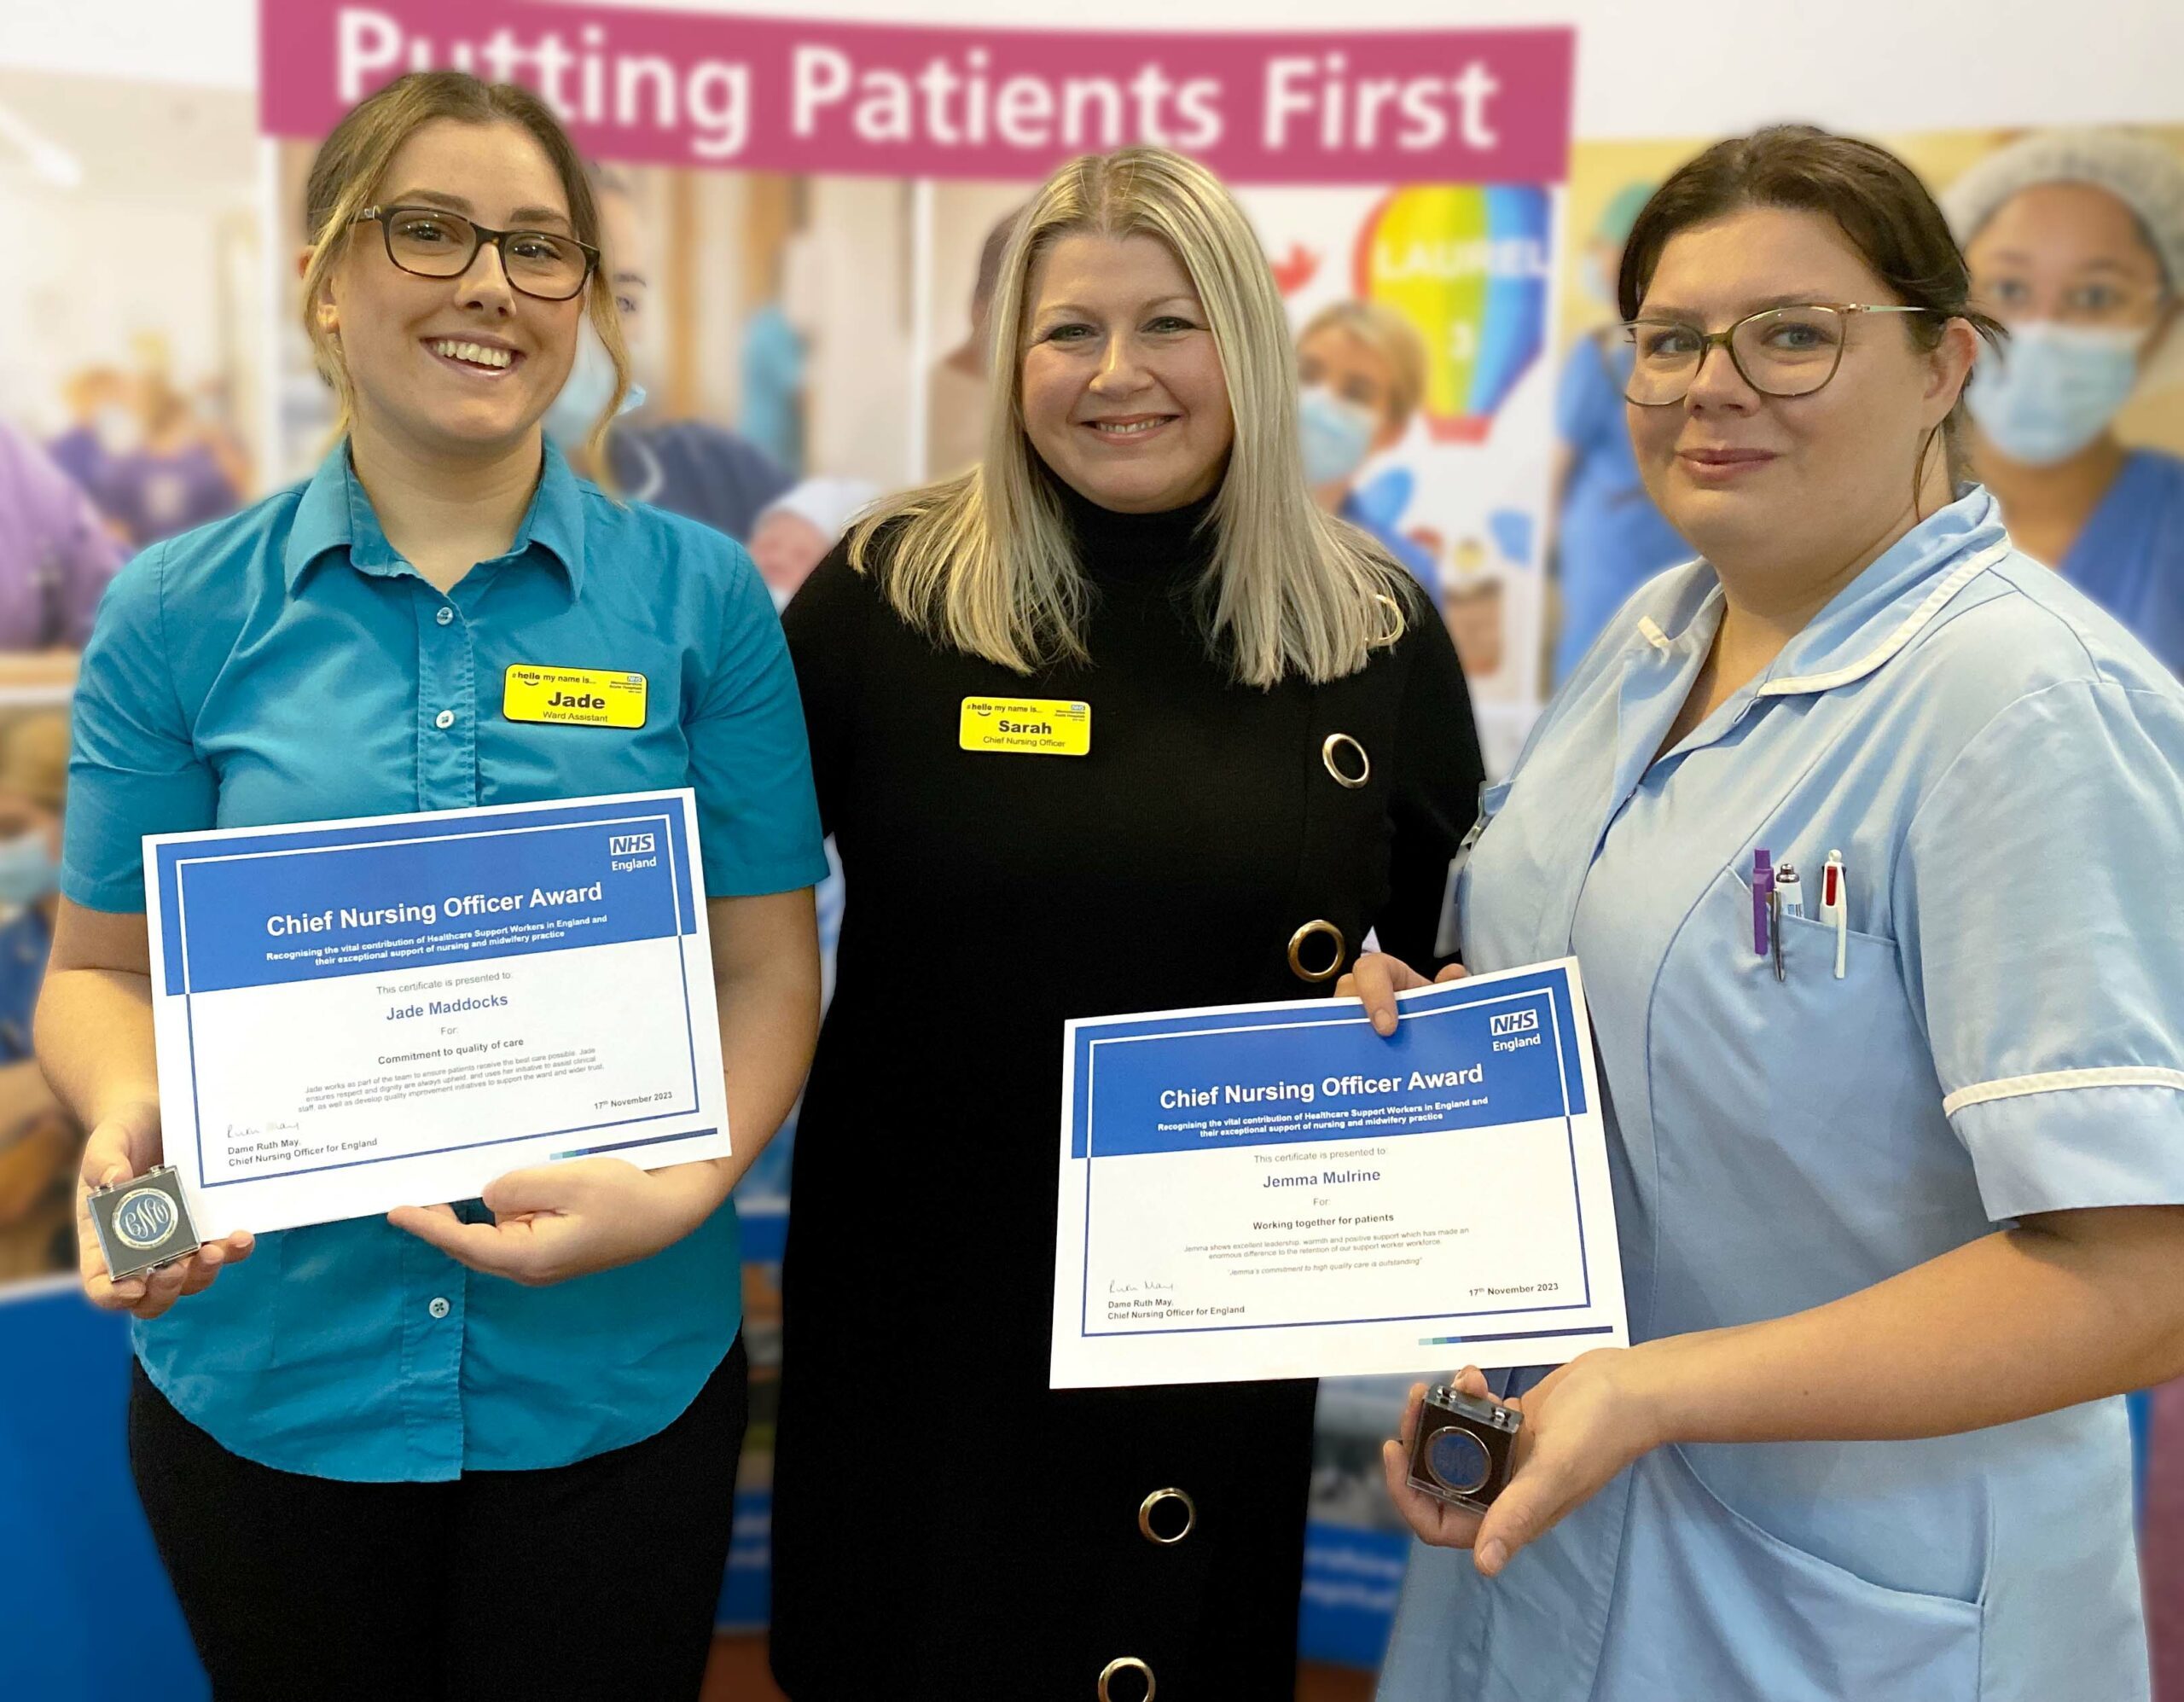 Jade Maddocks (left) and Jemma Mulrine (right) with their Chief Nursing Officer Healthcare Support Worker Awards, after being presented by Chief Nurse of Worcestershire Acute Hospitals NHS Trust, Sarah Shingler (centre).